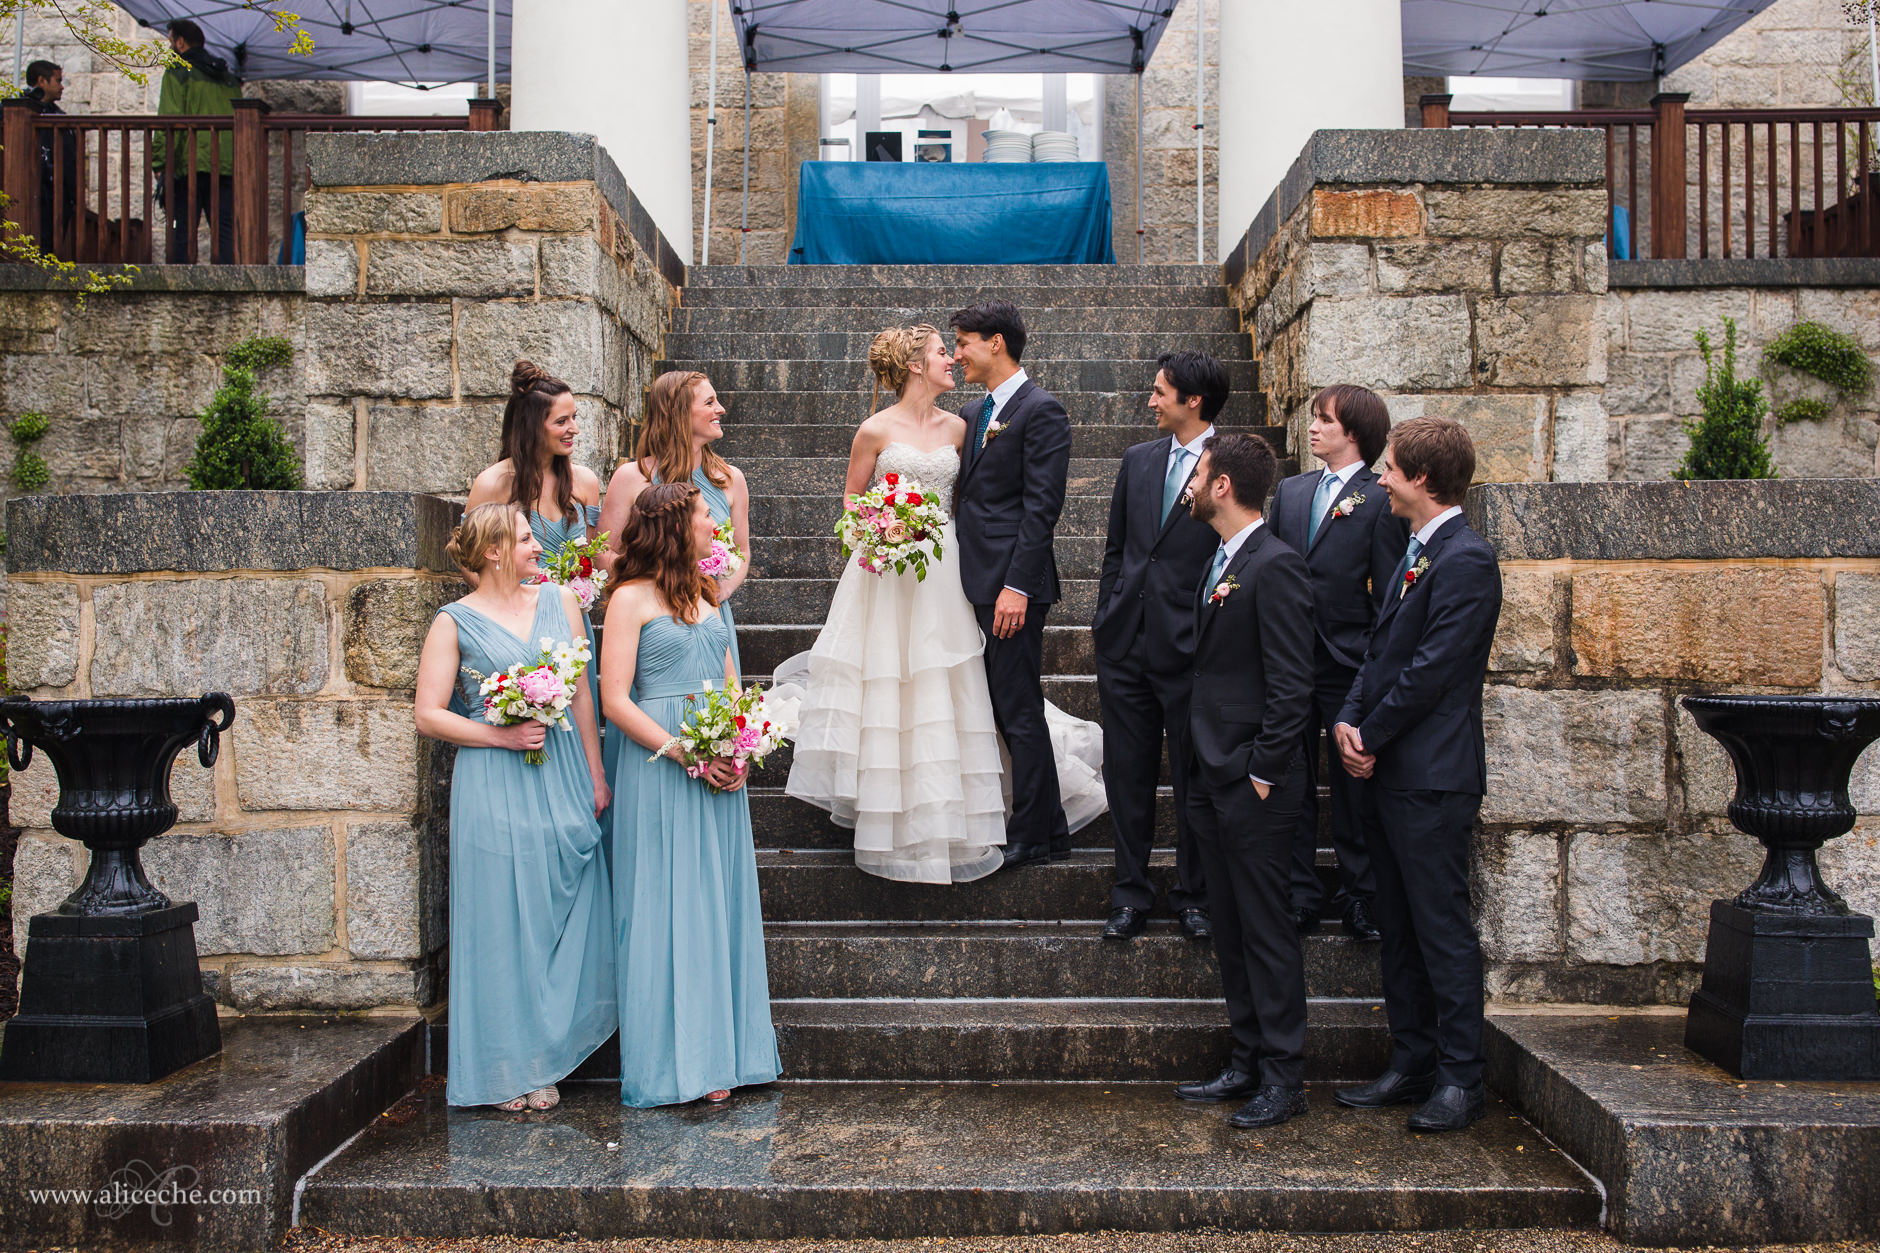 Bridal Party photos on the main steps of PFI in Ellicott City, MD